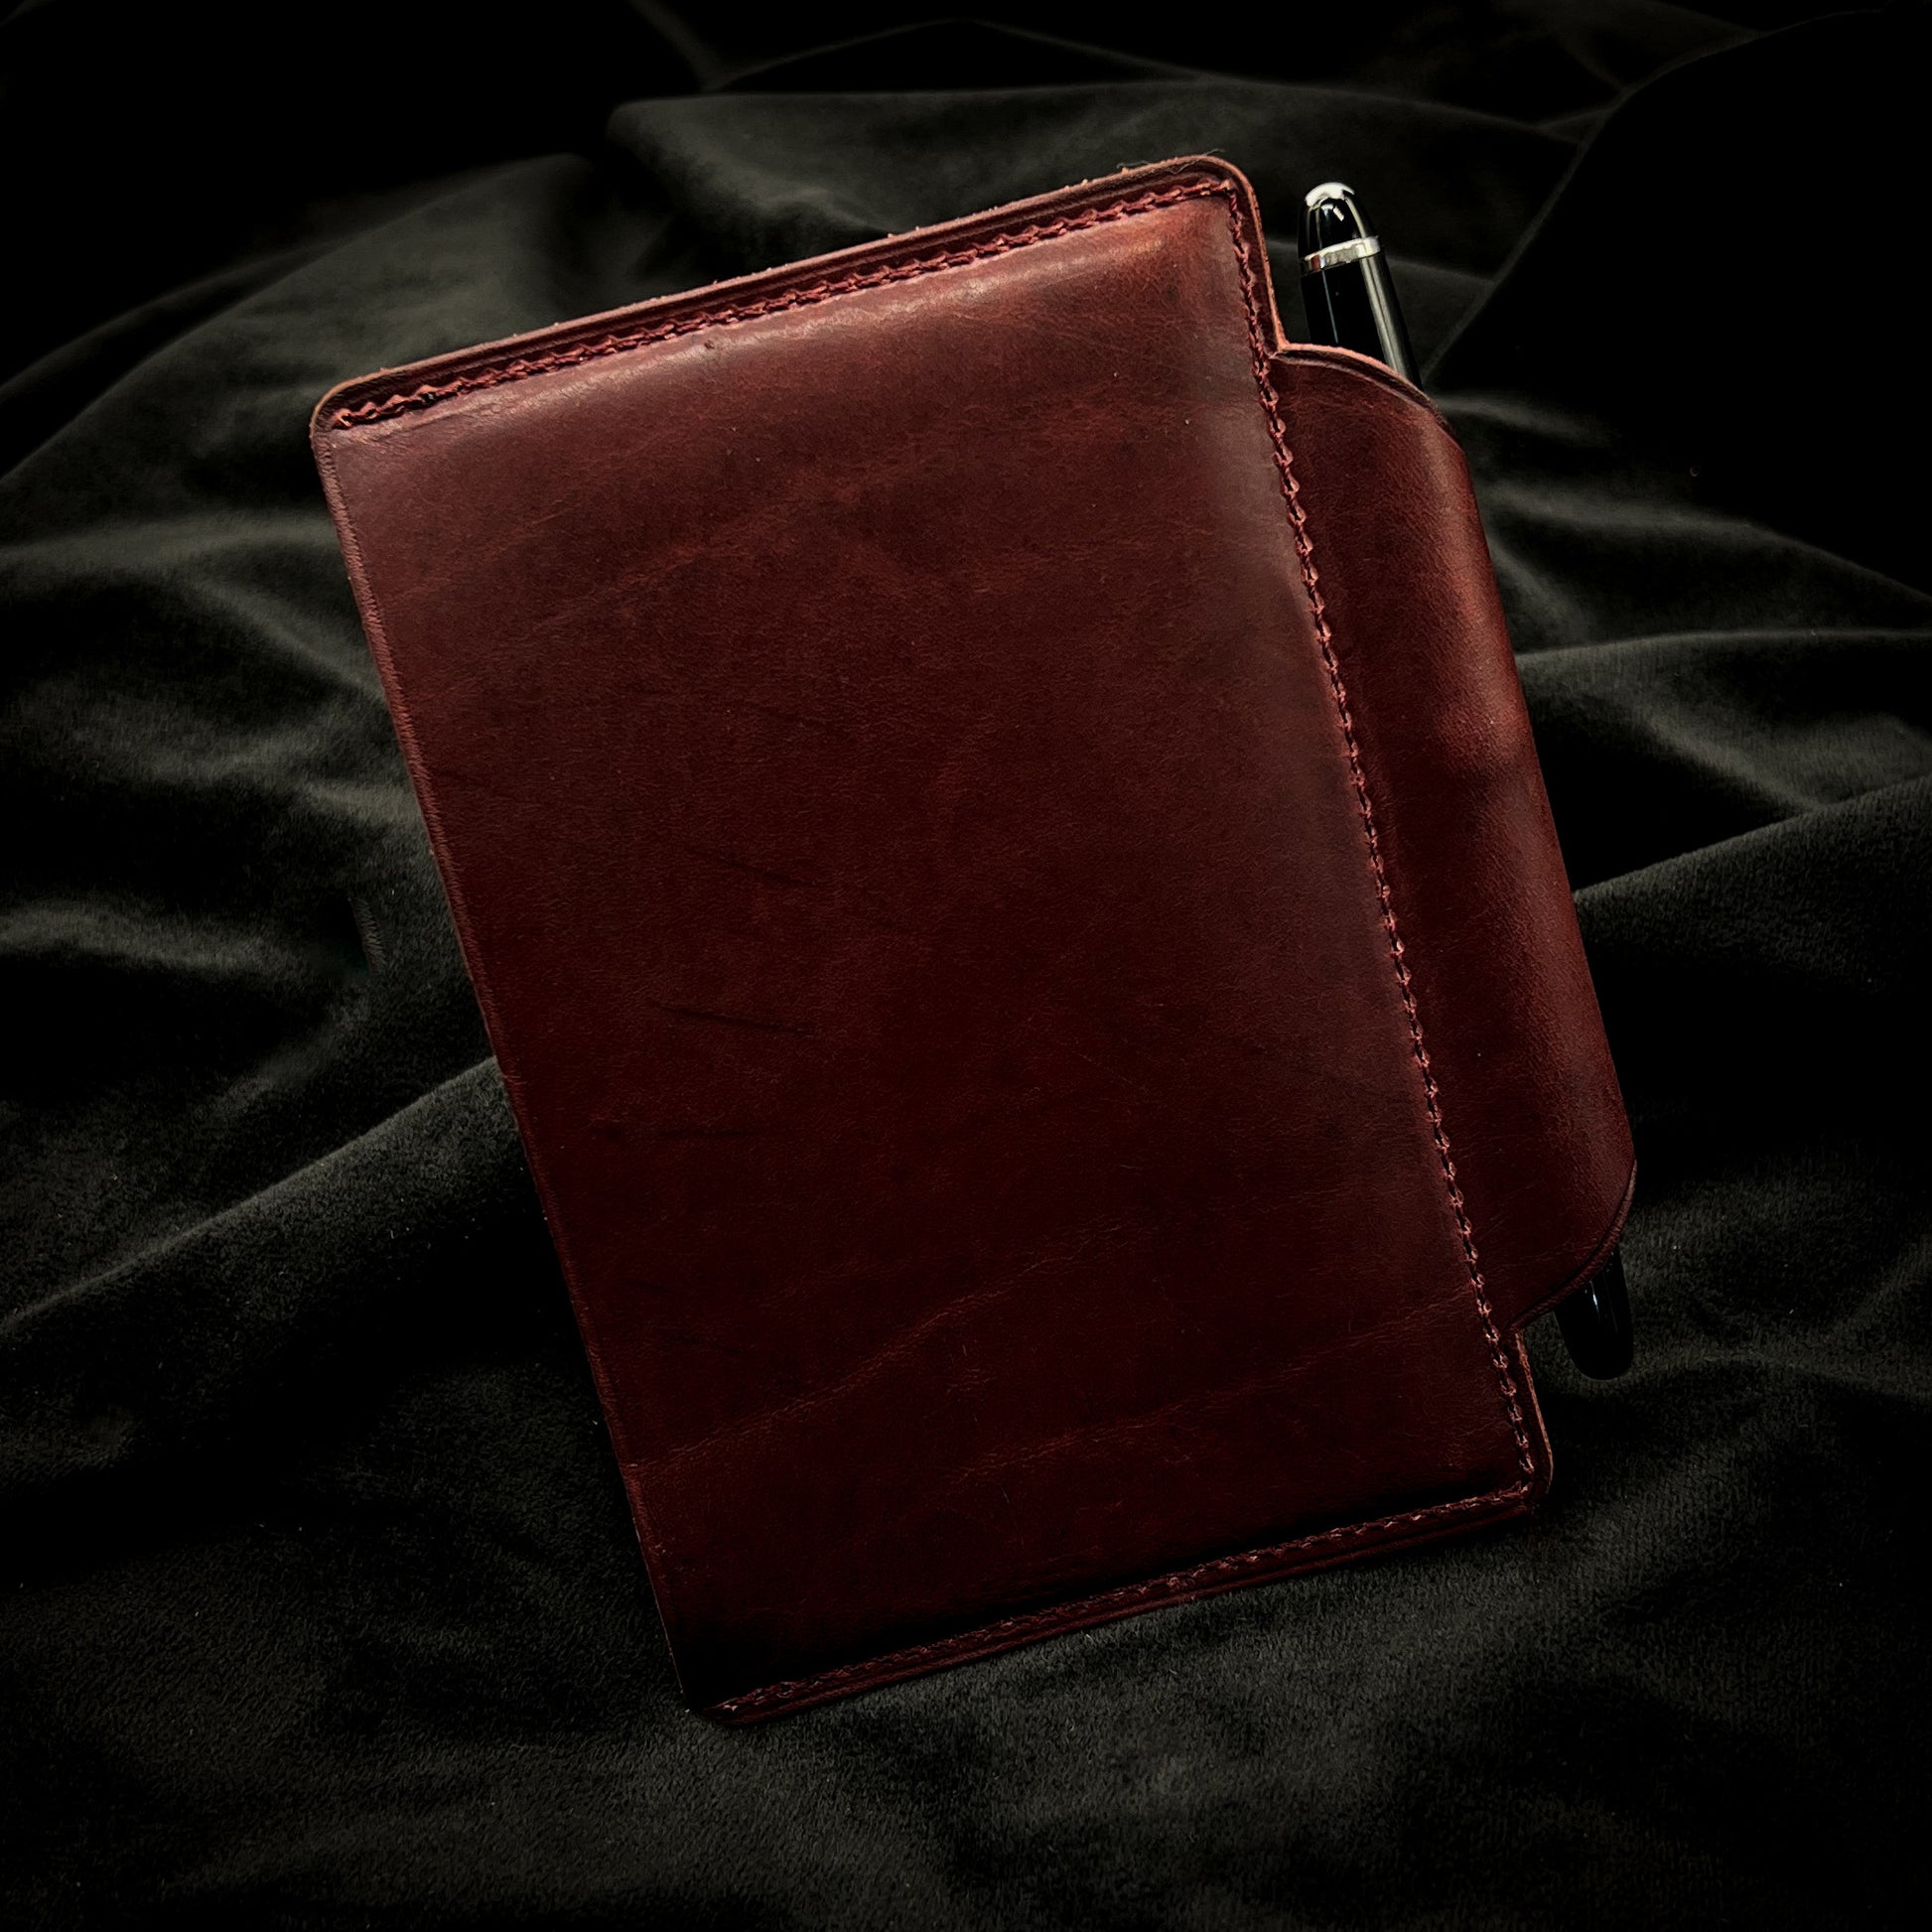 Back Cover of Pocket Notebook Sleeve Cover for 3.5x5.5 inch format notebooks in Horween leather.  Handmade to order by Custom Leather and Pen in Houston, TX